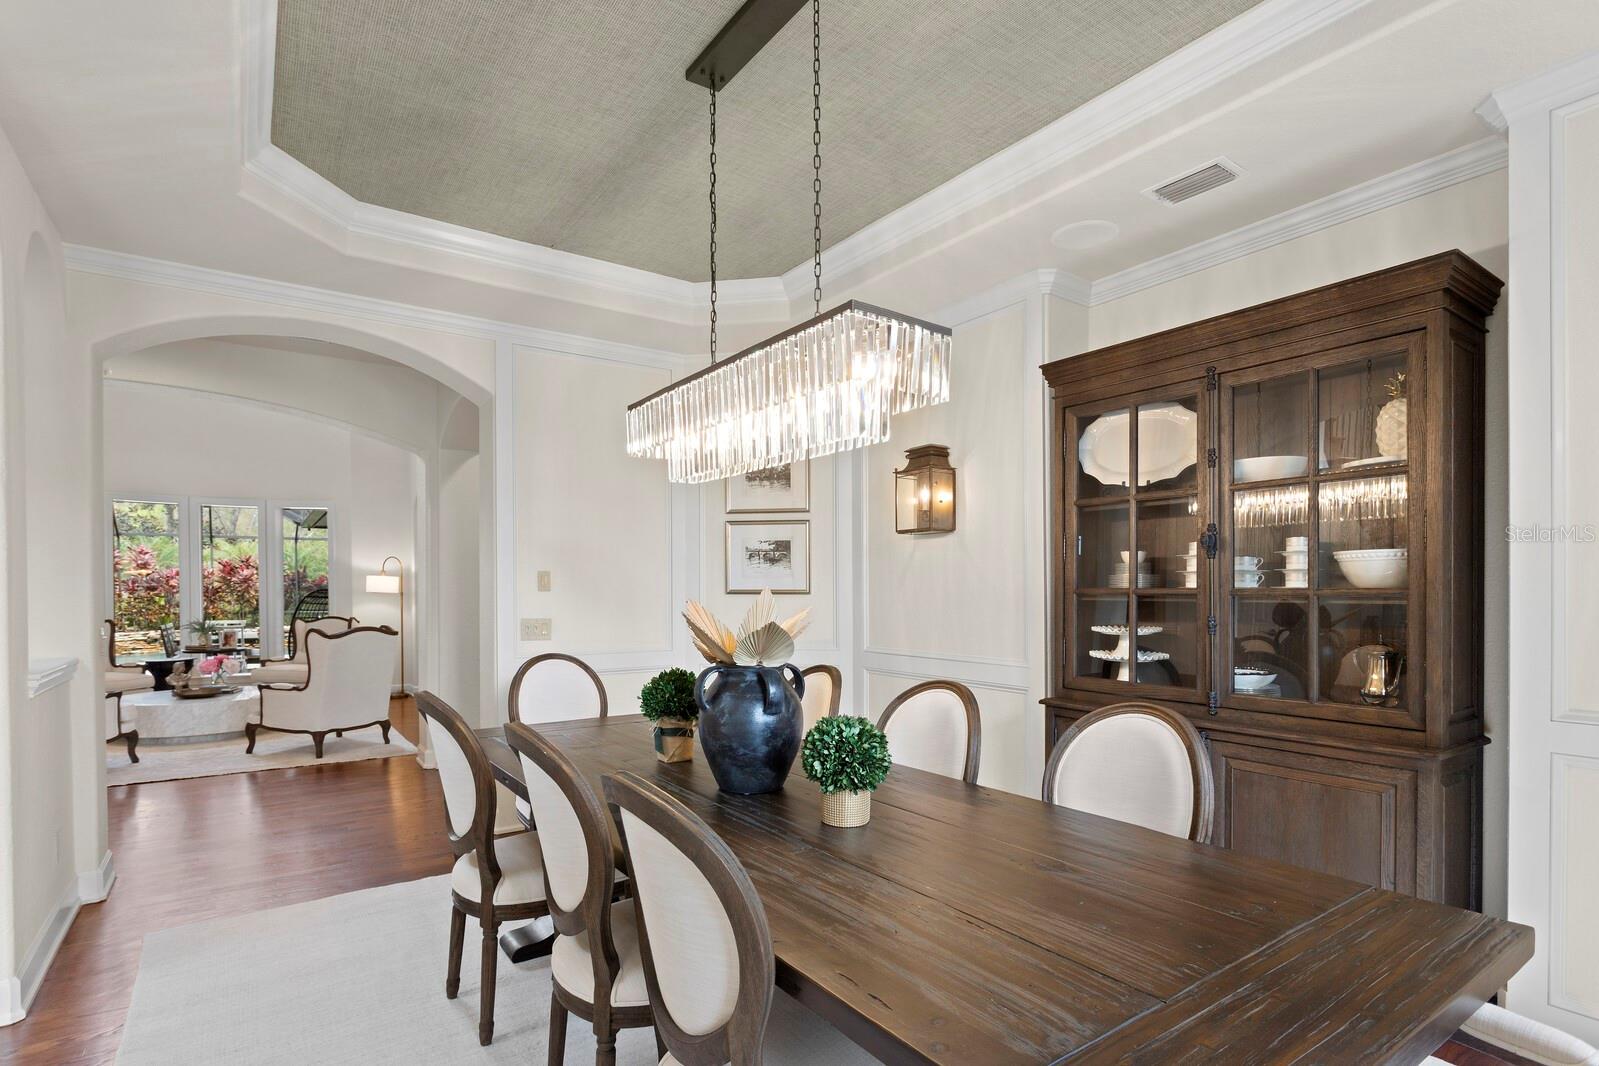 Jaw dropping dining room with deep tray ceiling!